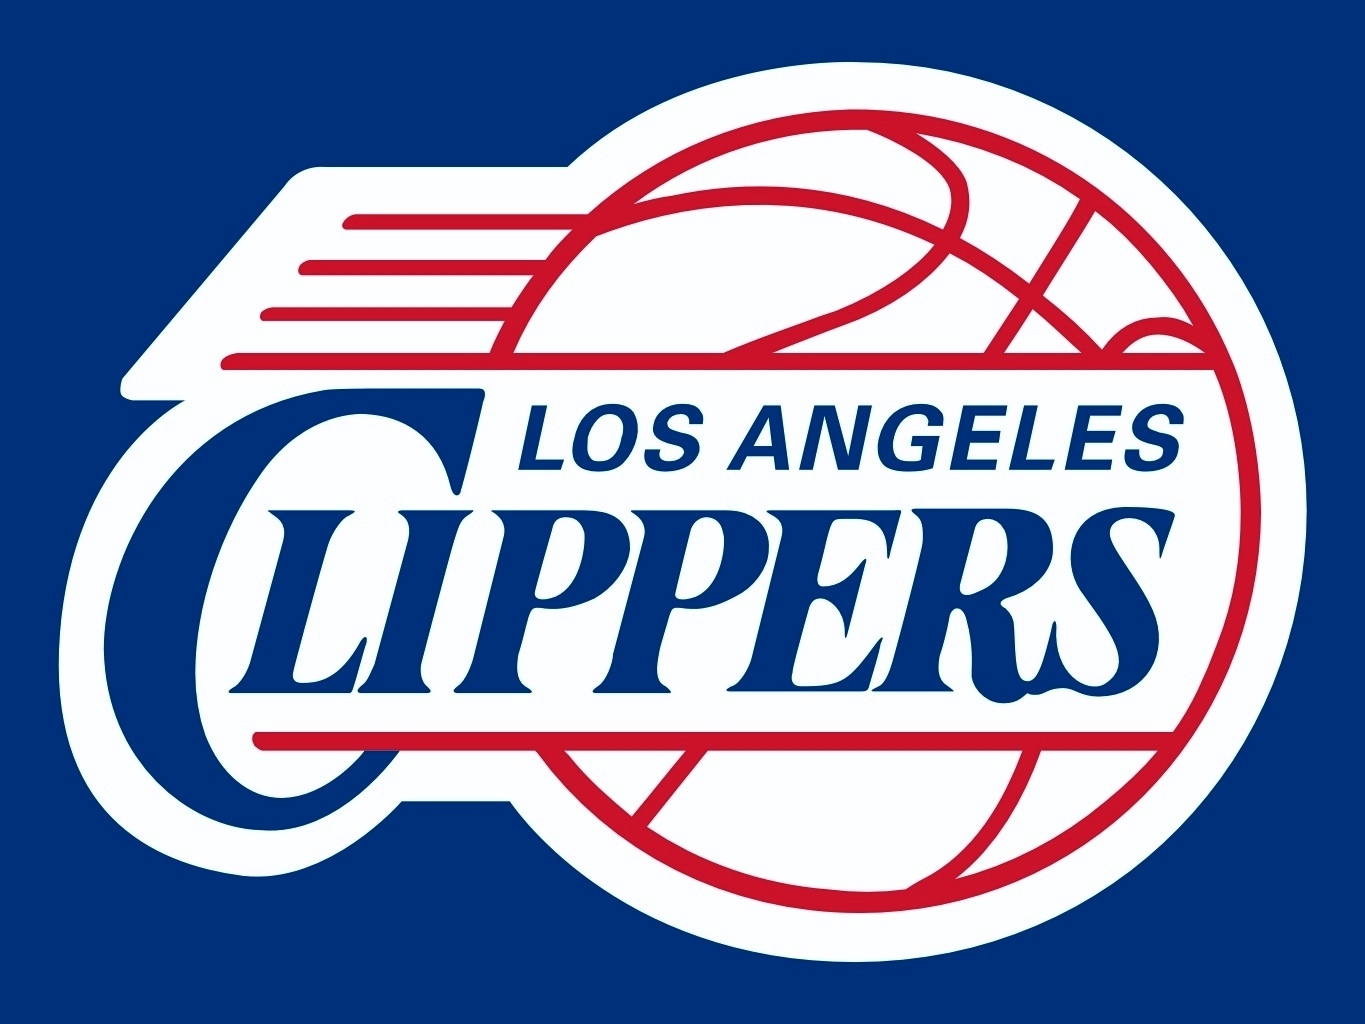 los angeles clippers clip art - photo #4